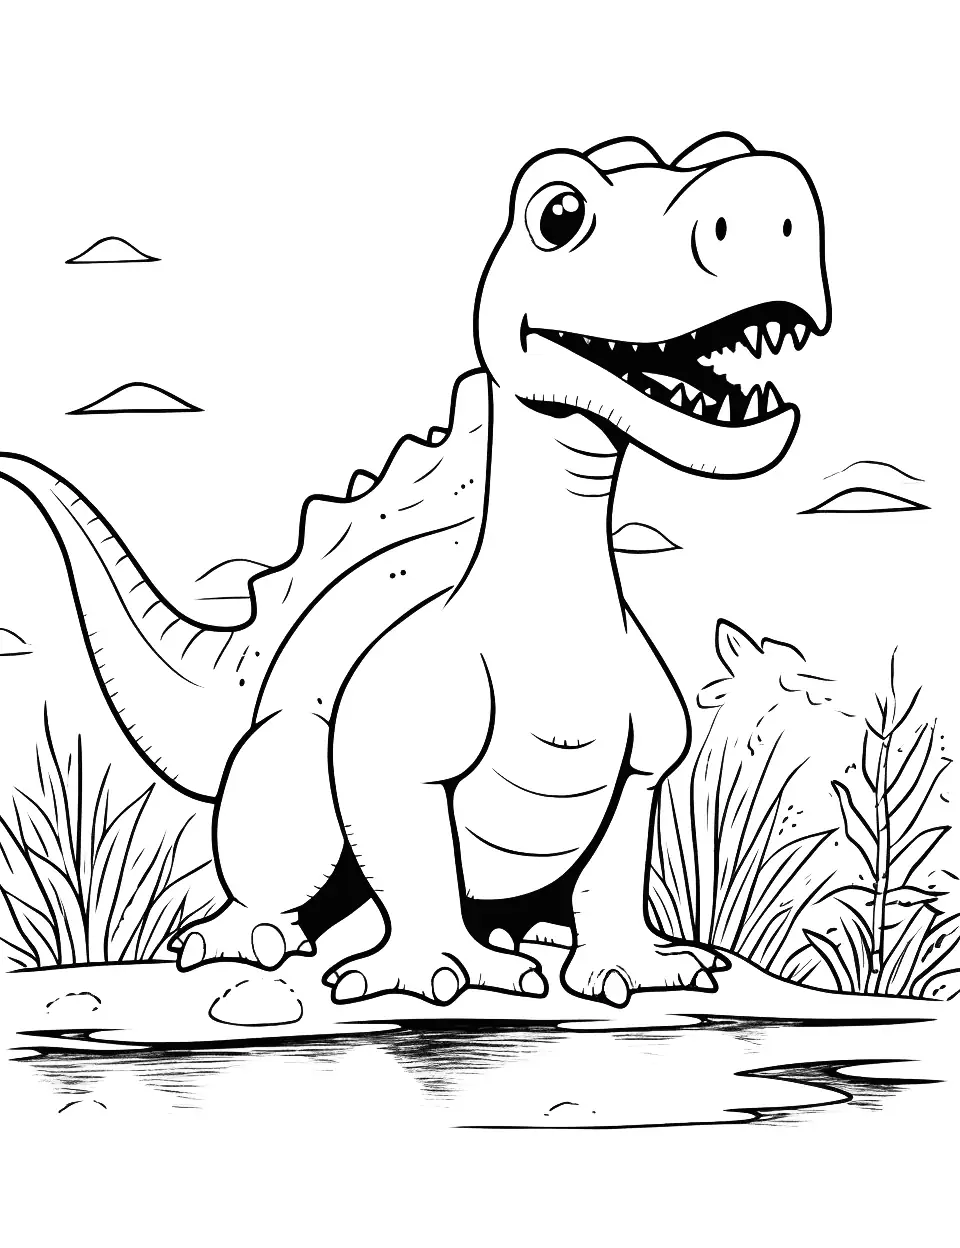 Baryonyx in the Swamp Dinosaur Coloring Page - A Baryonyx hunting for fish in a prehistoric swamp.